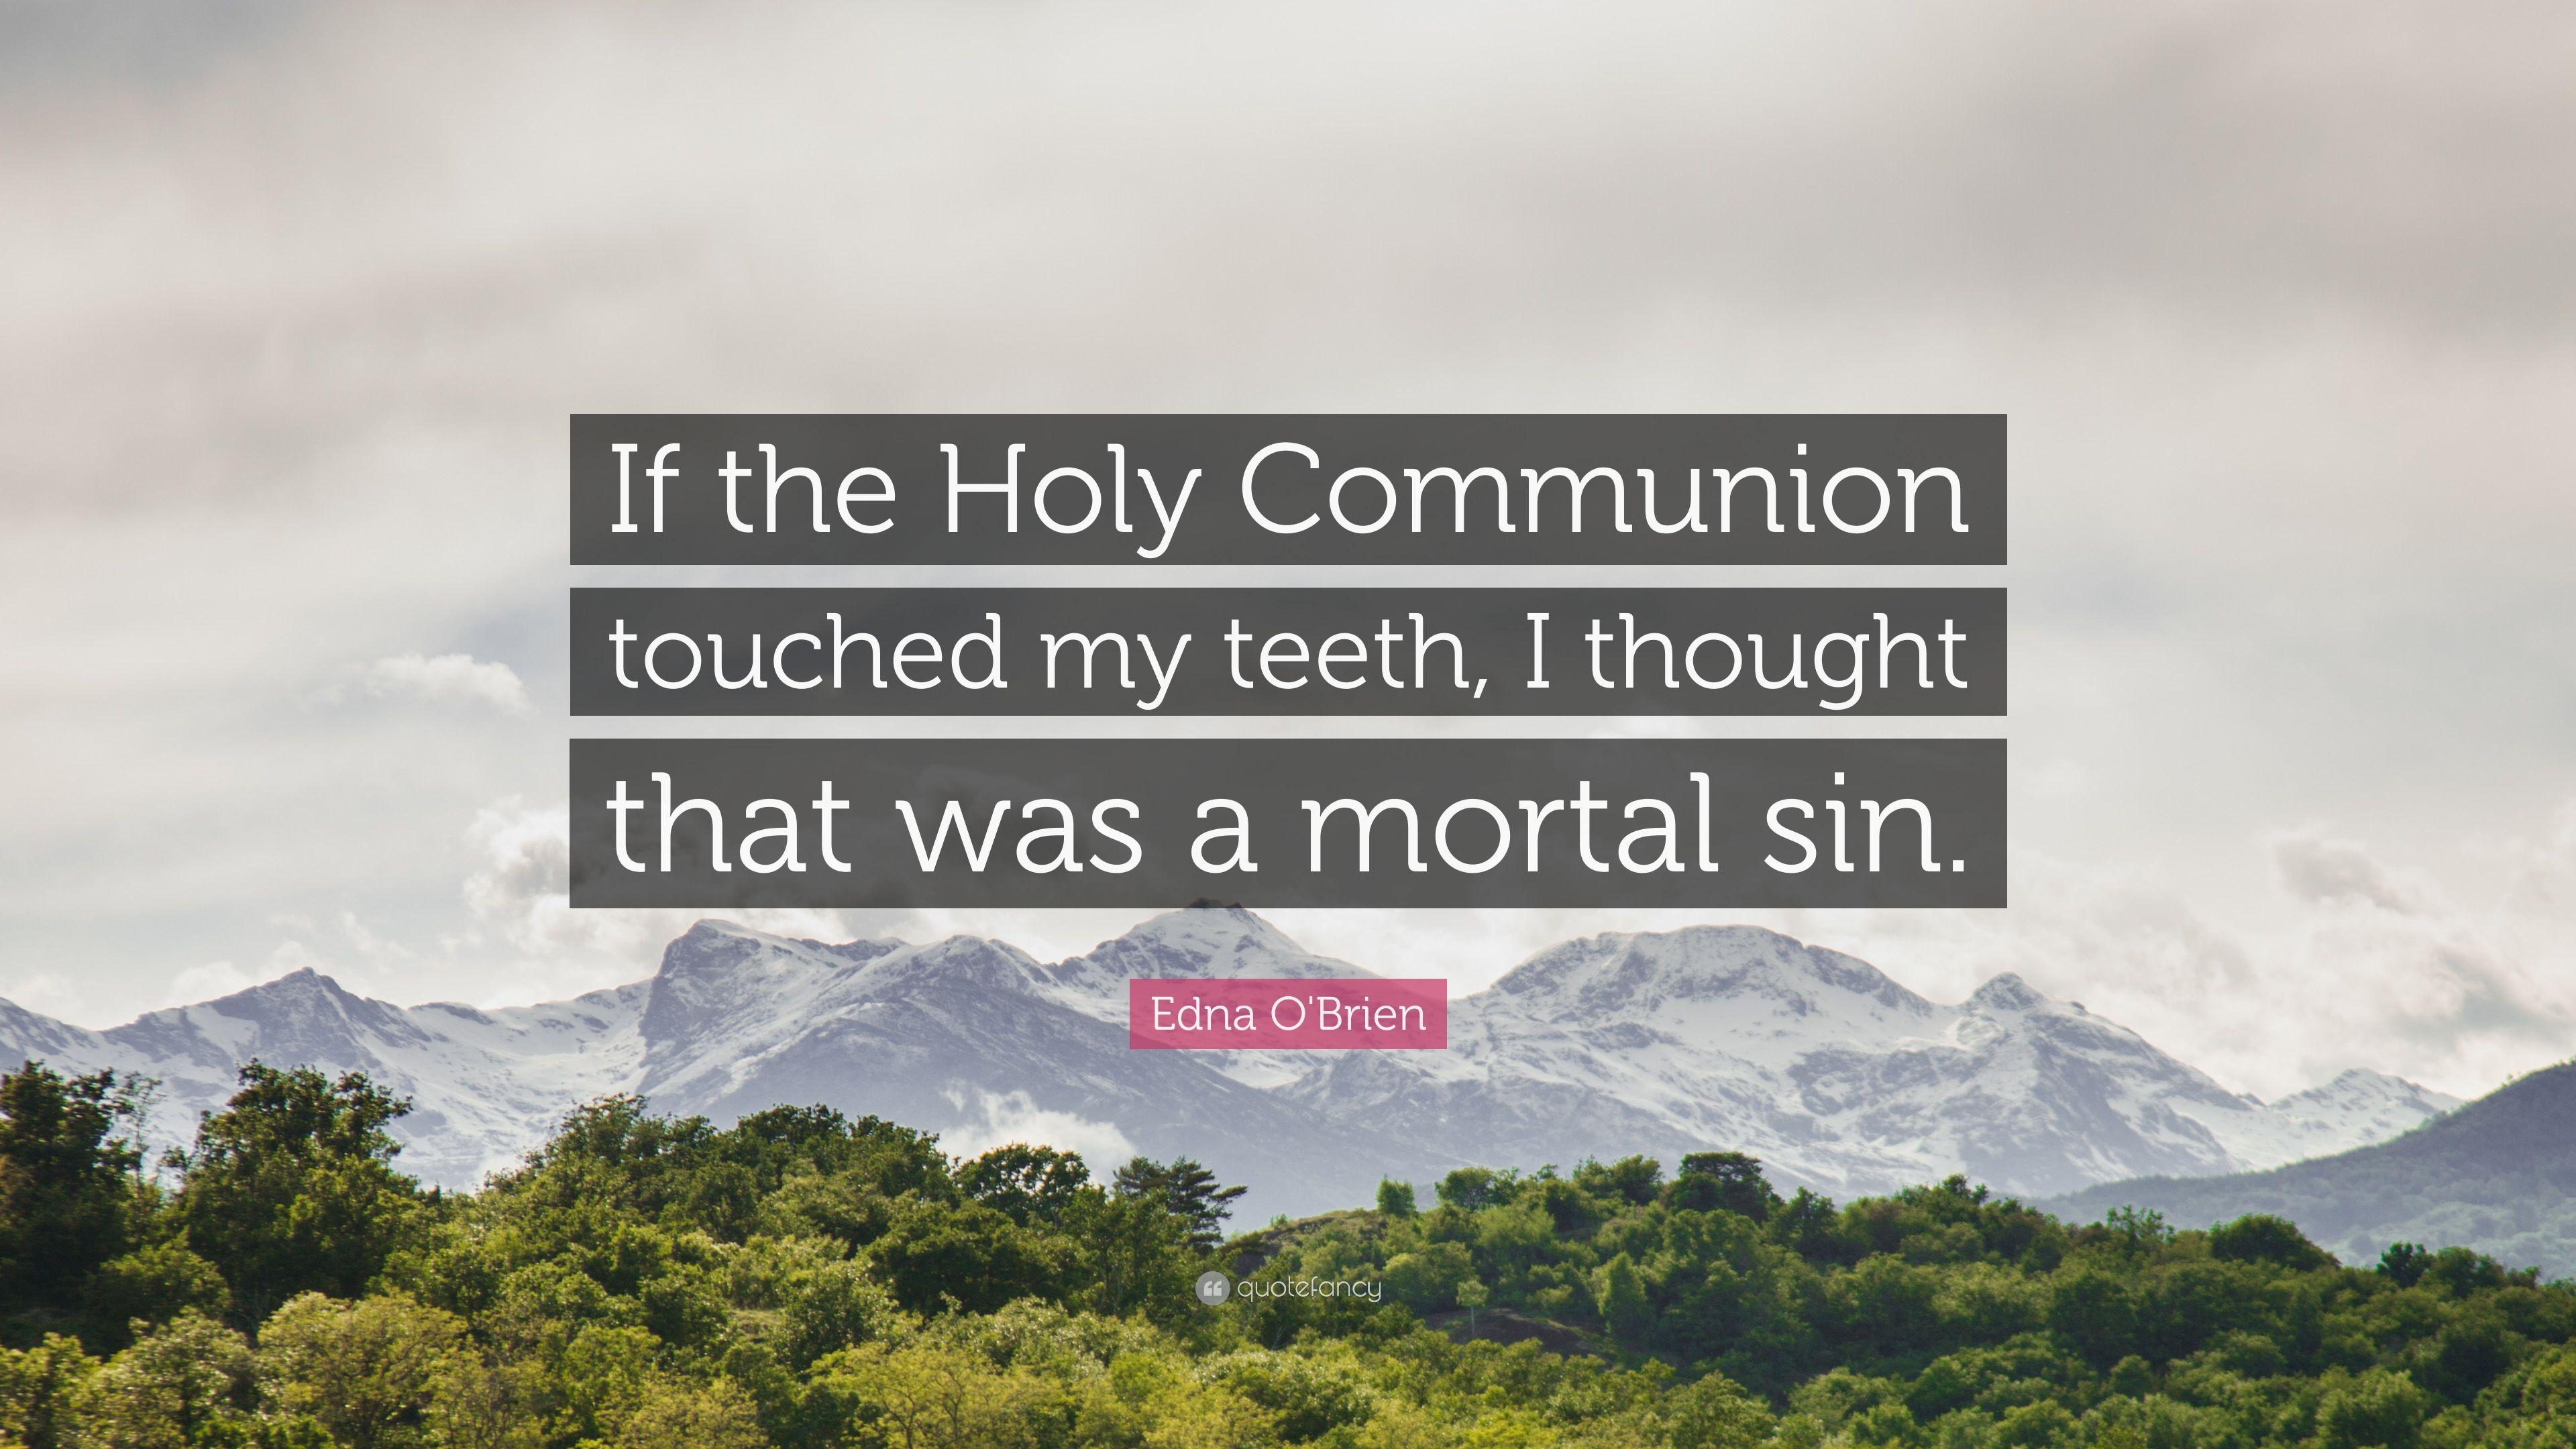 Edna O'Brien Quote: “If the Holy Communion touched my teeth, I